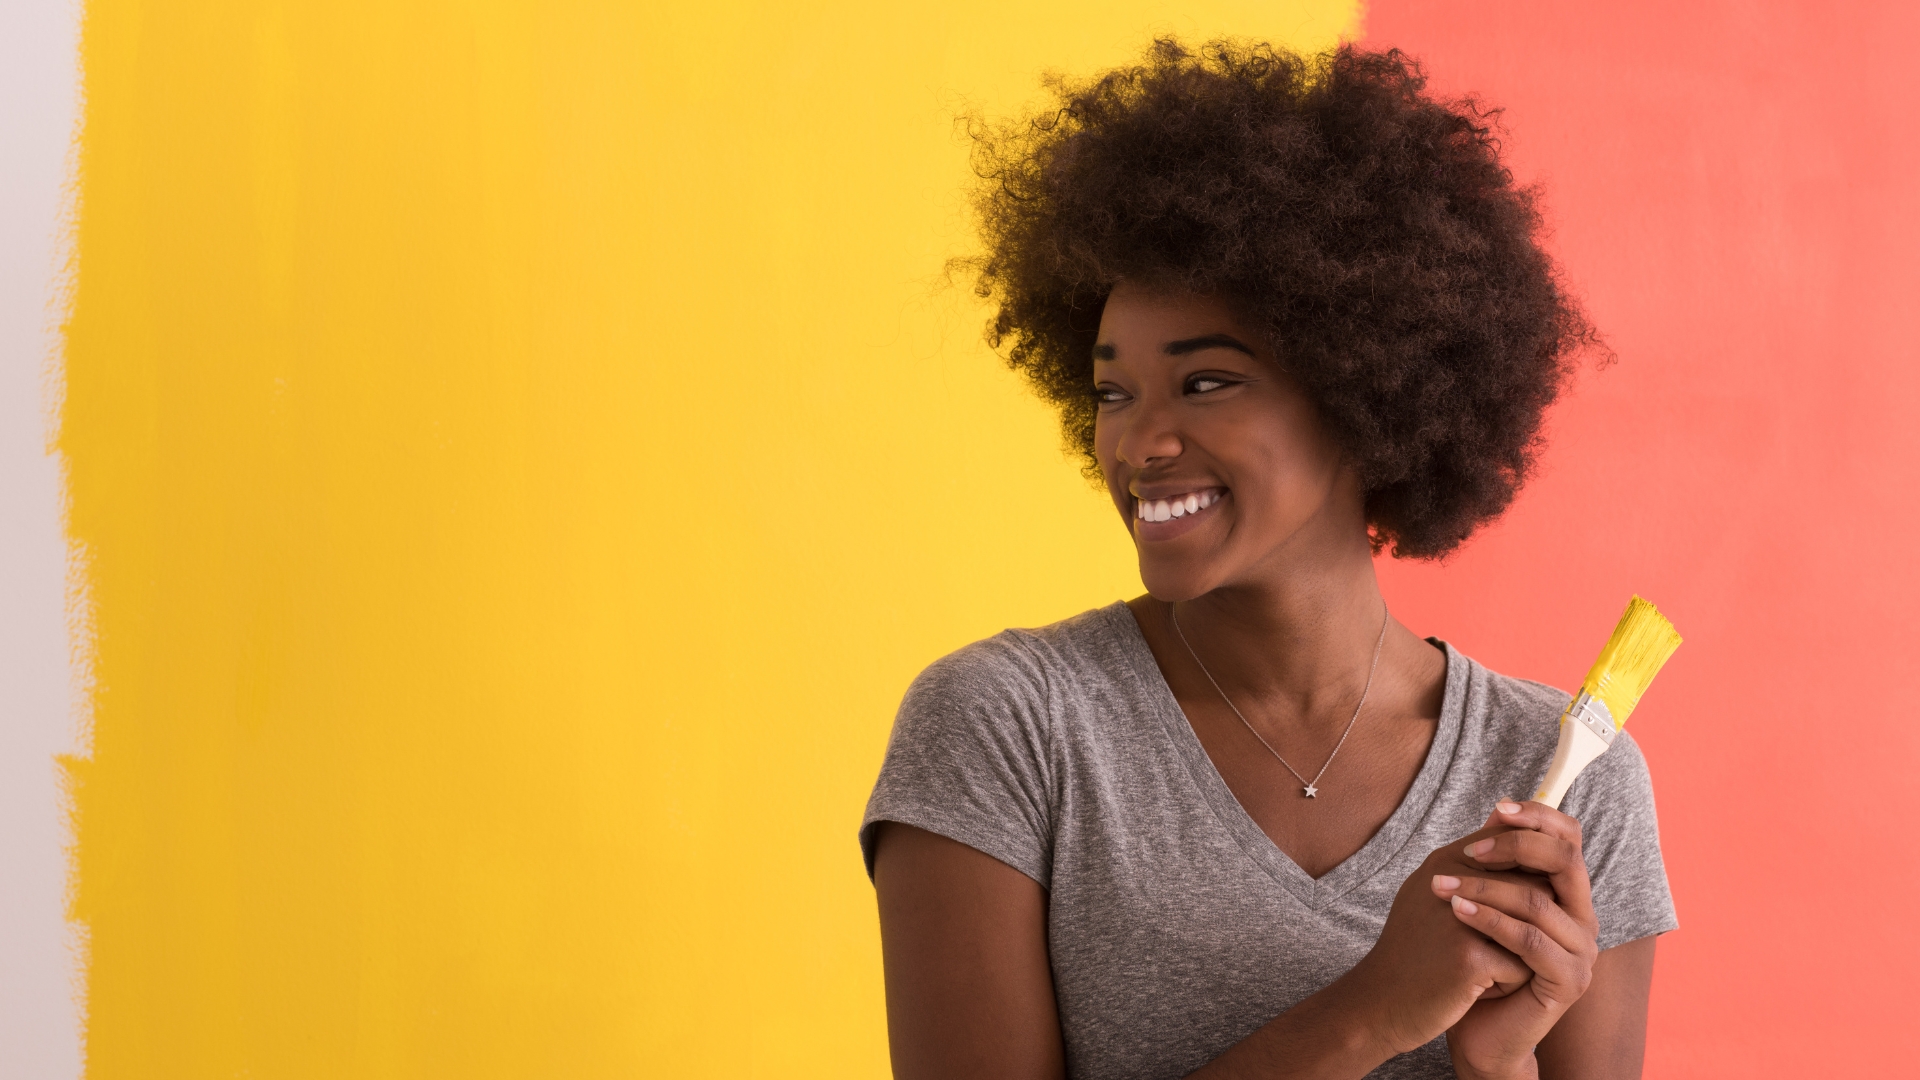 African American woman with an afro holding a paint brush in front of a two-toned wall that she just painted.